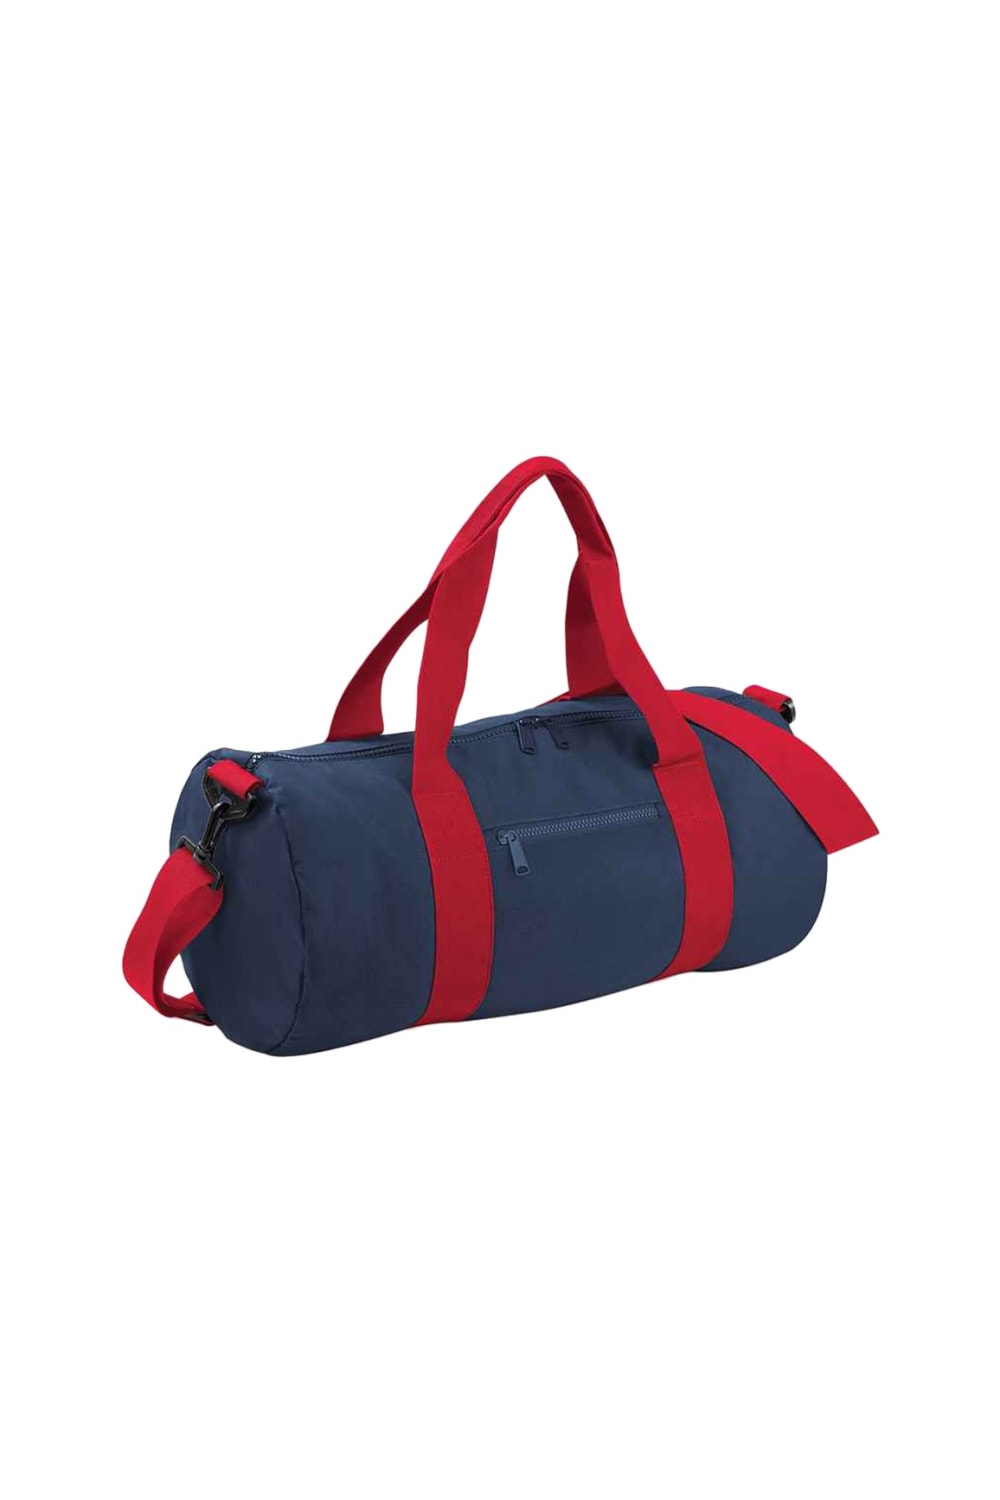 Bagbase Plain Varsity Barrel/Duffel Bag (5 Gallons) (Pack of 2) (French Navy/Classic Red) (One Size)